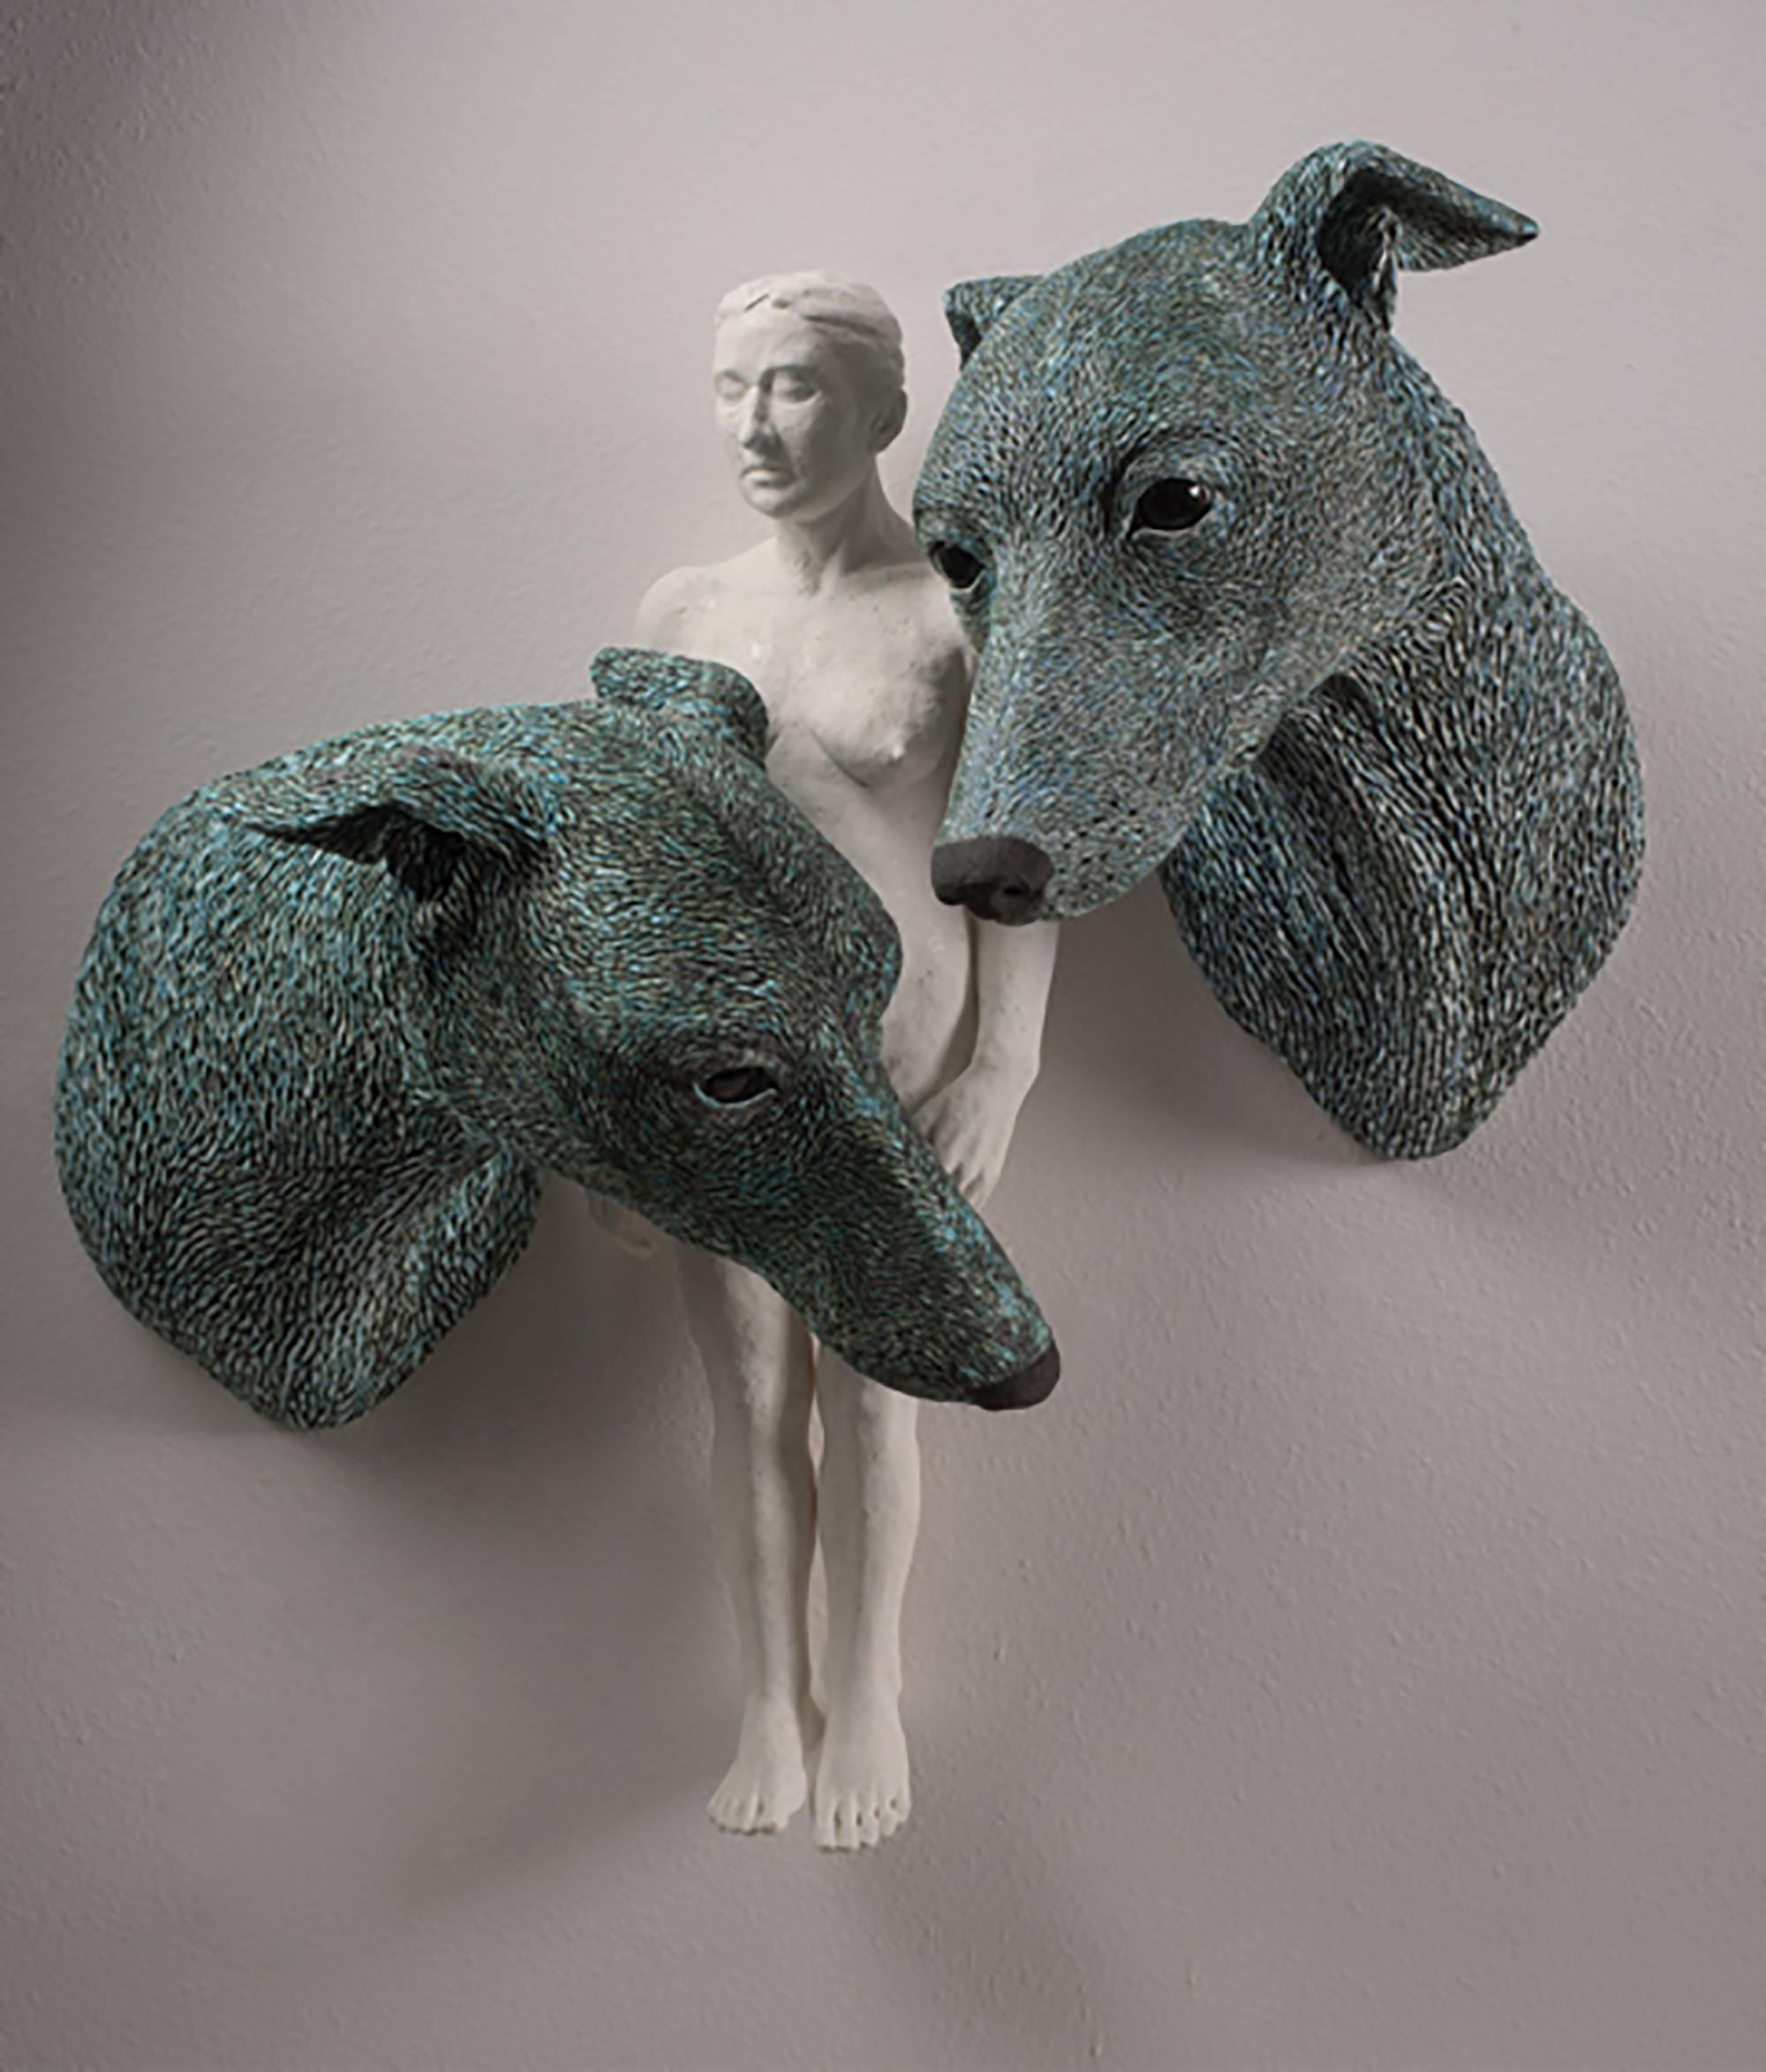 Adrian Arleo Figurative Sculpture - ANIMA AND ANIMUS - large ceramic sculpture, nude woman and two dogs (greyhound)